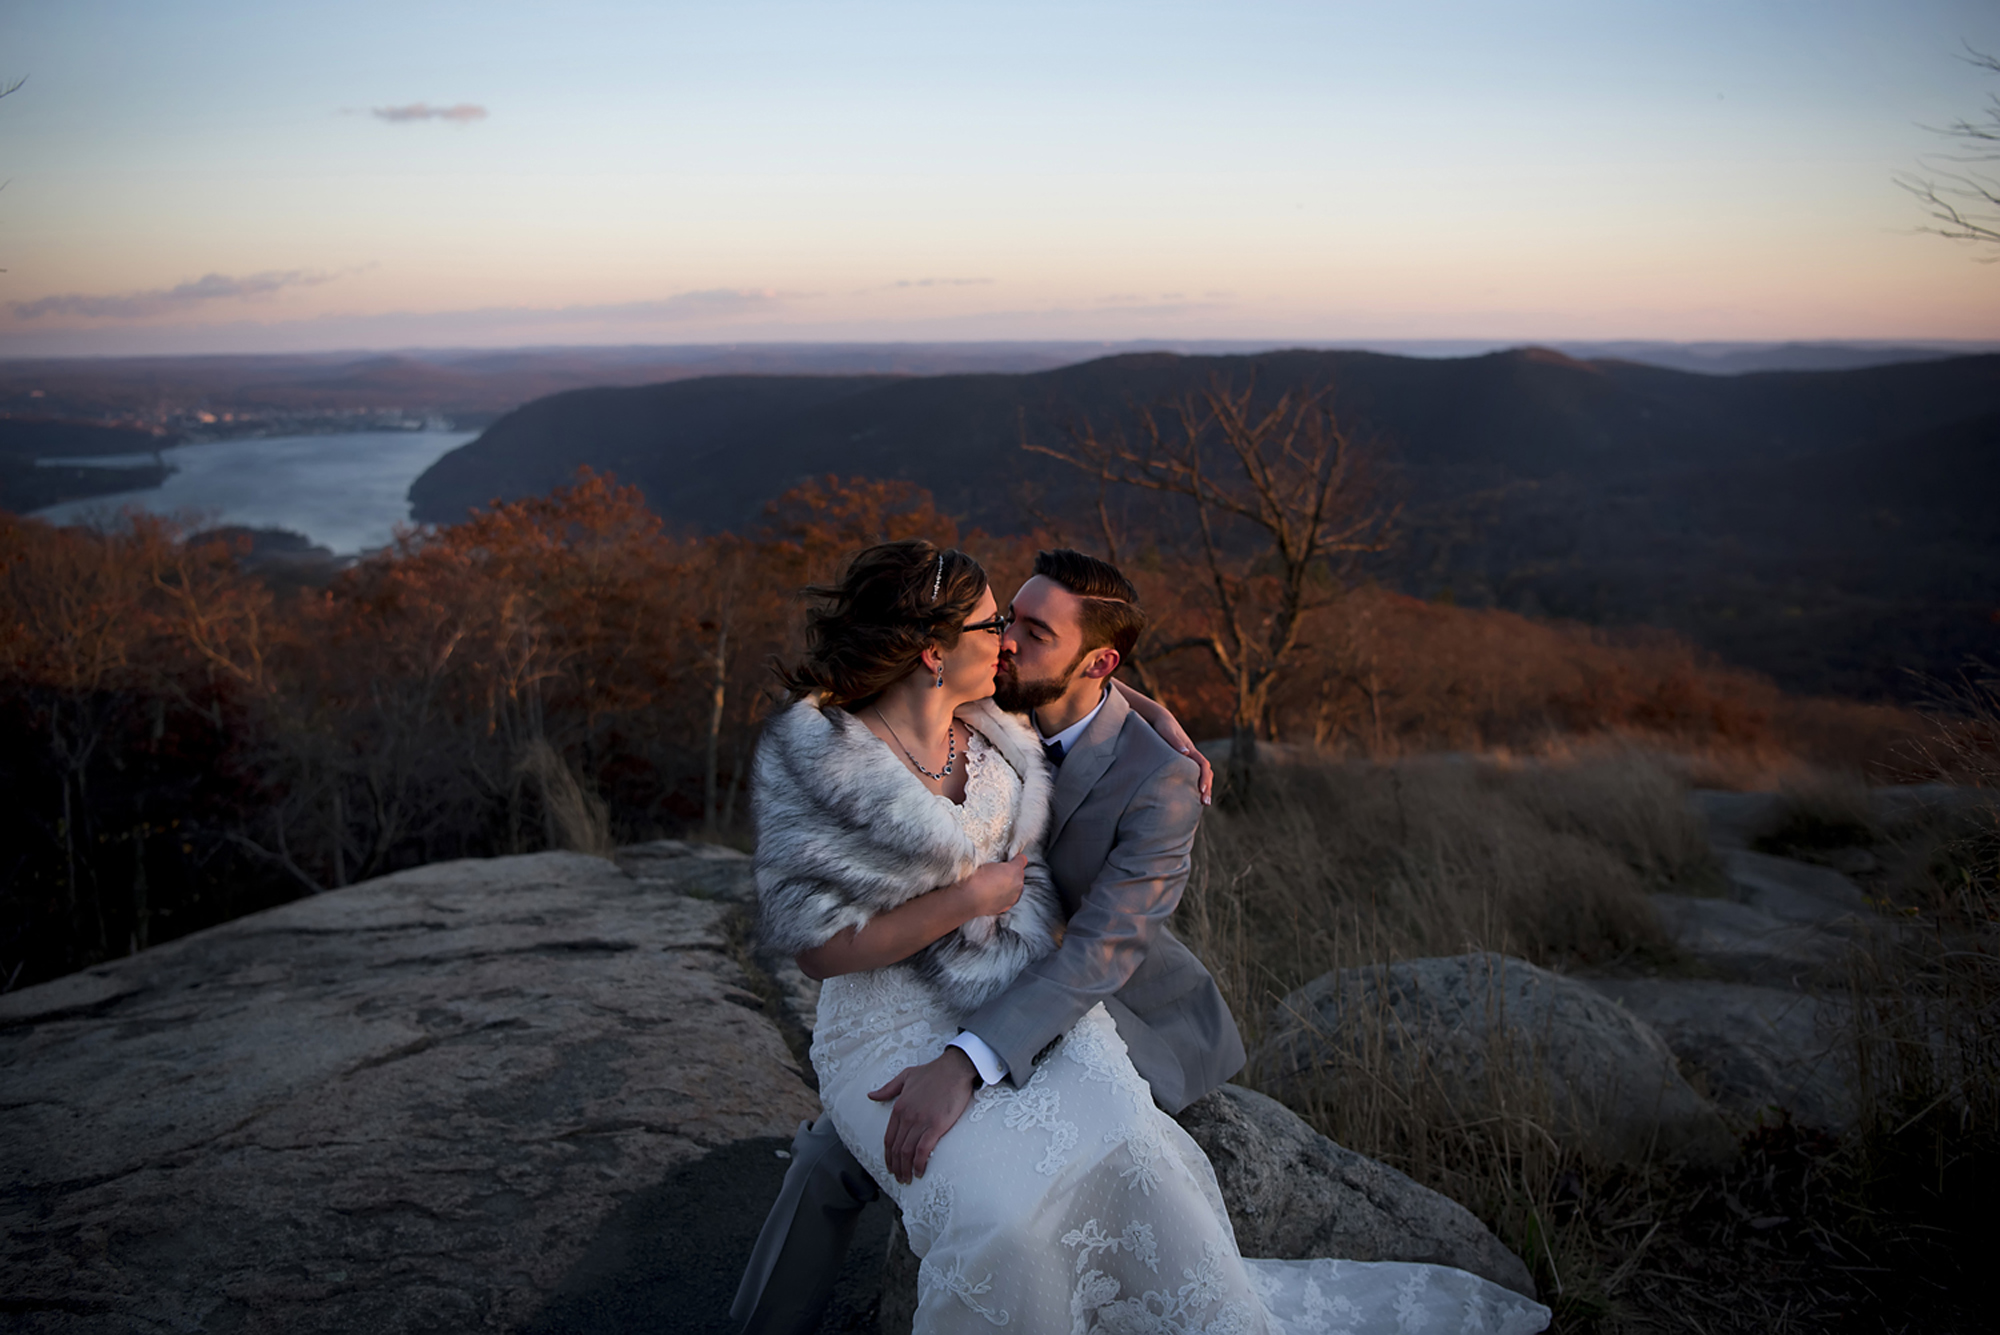 A couple kiss on a mountain top at sunset